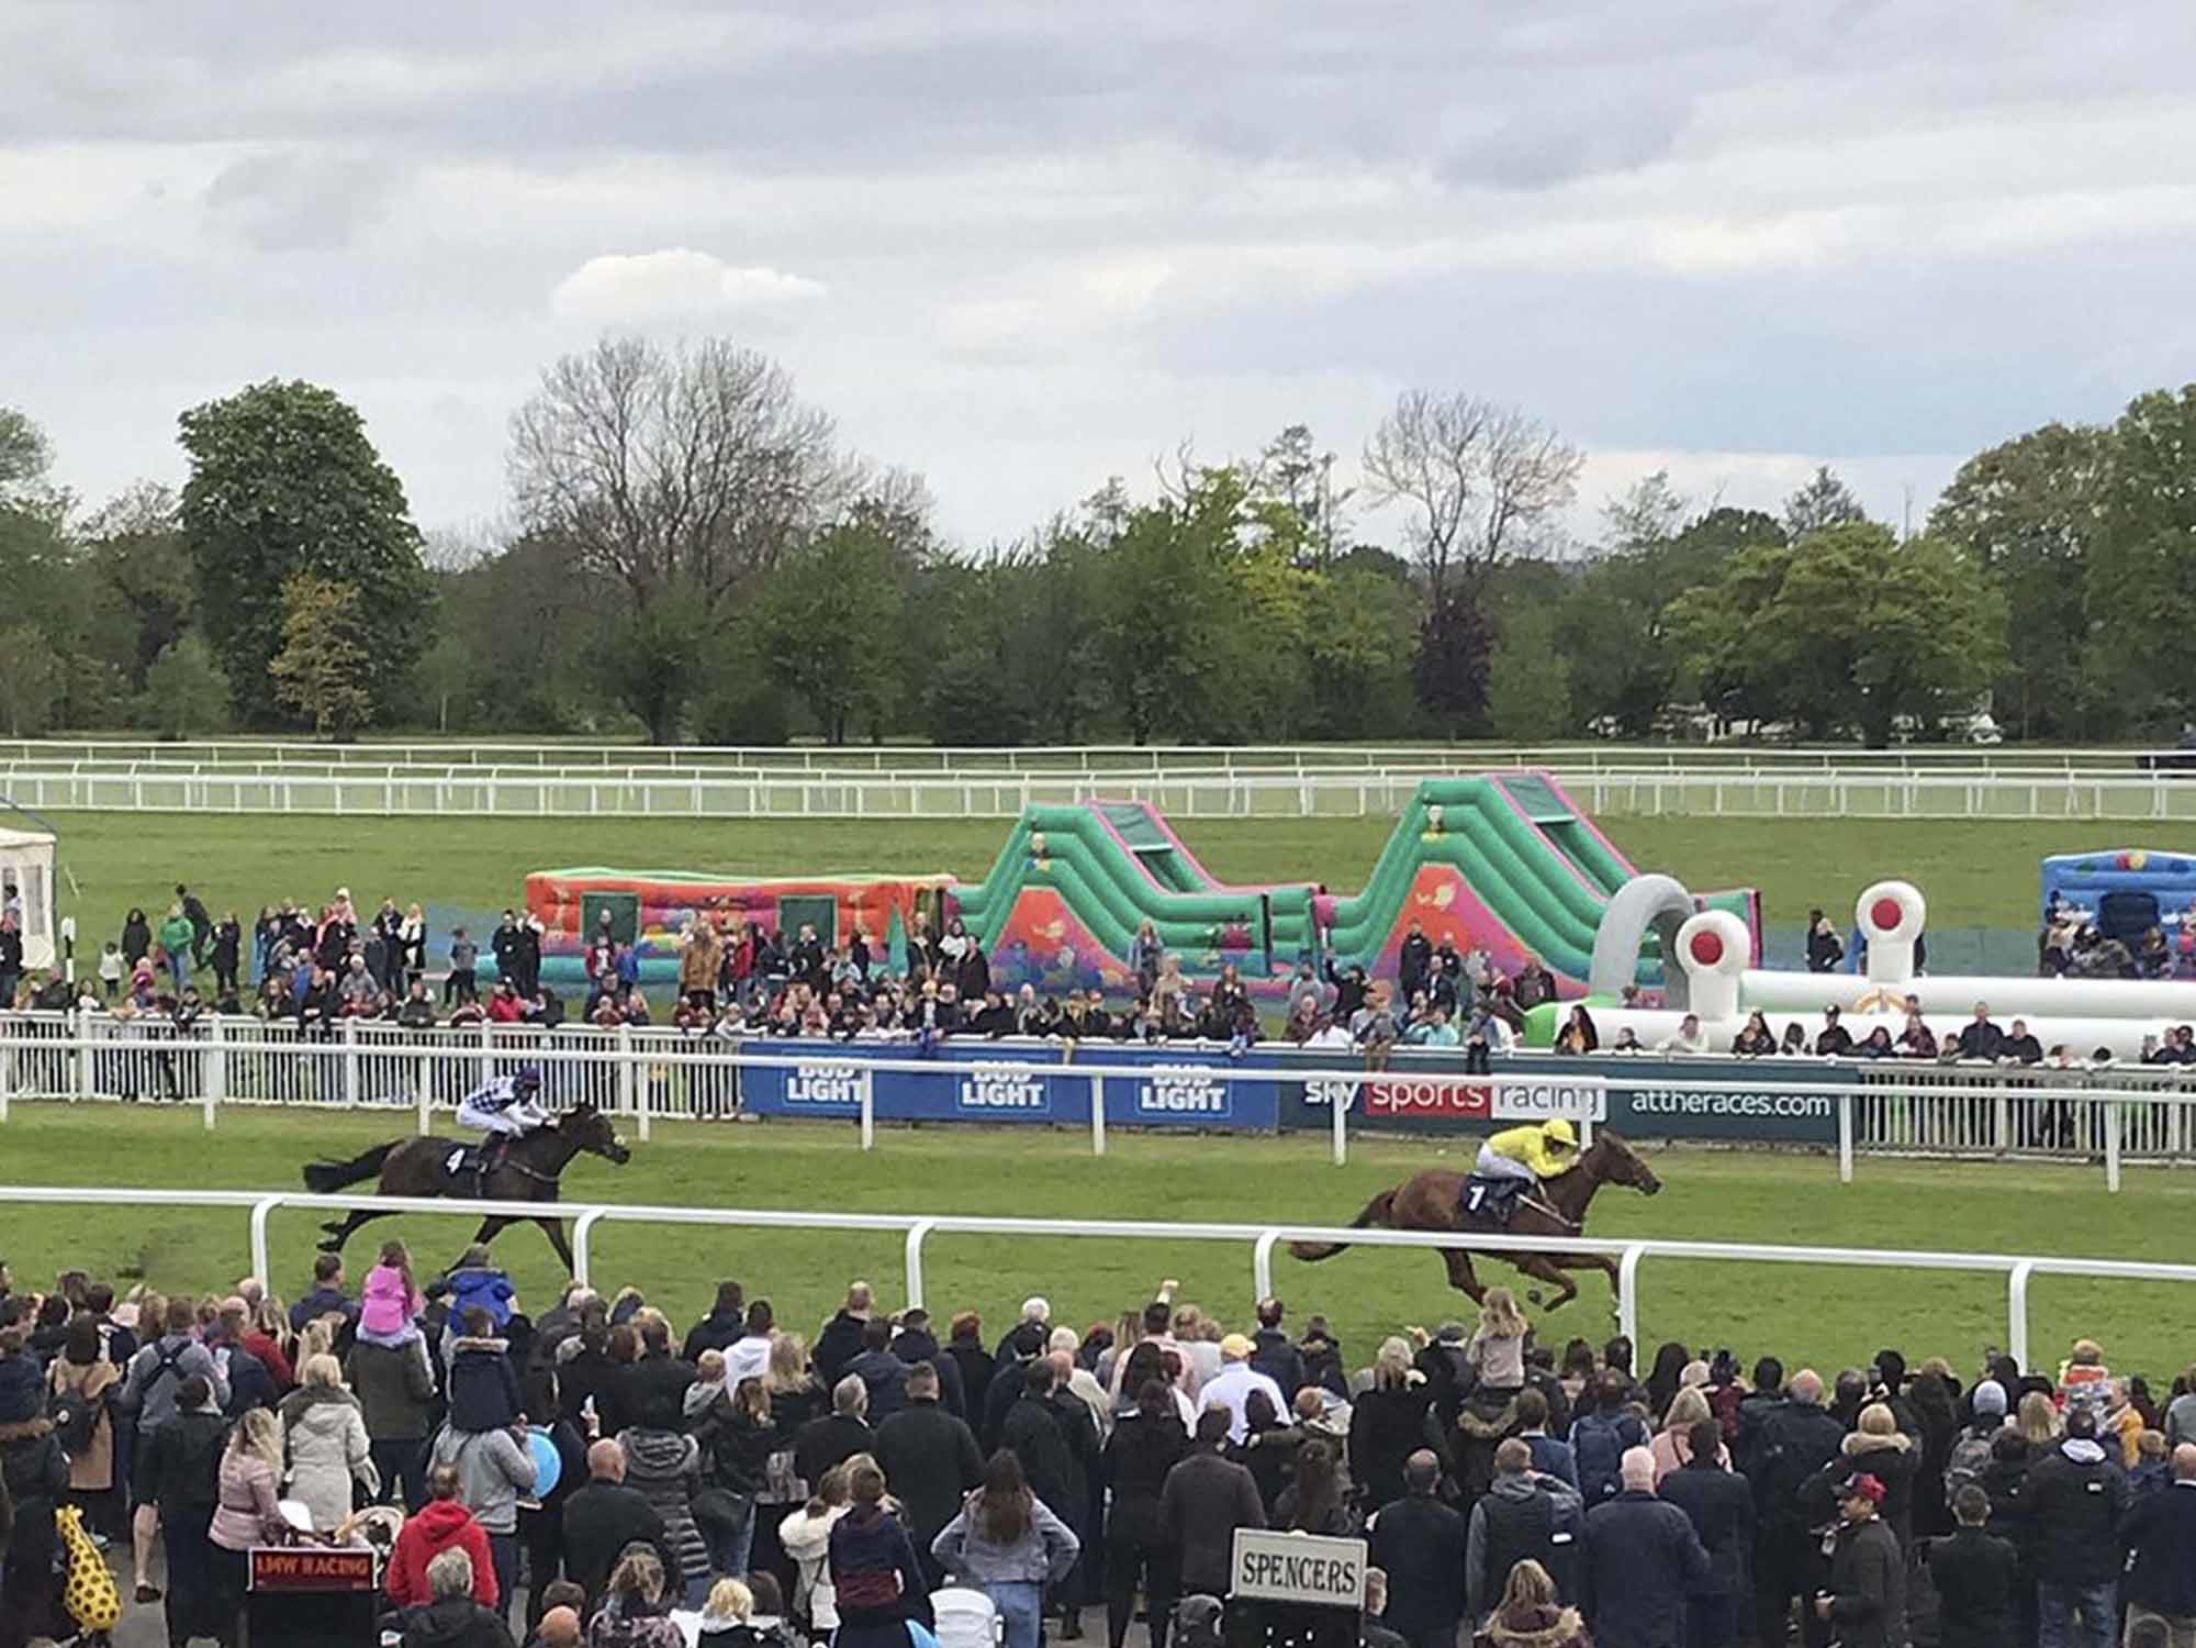 Things to do in Windsor - Royal Windsor Racecourse